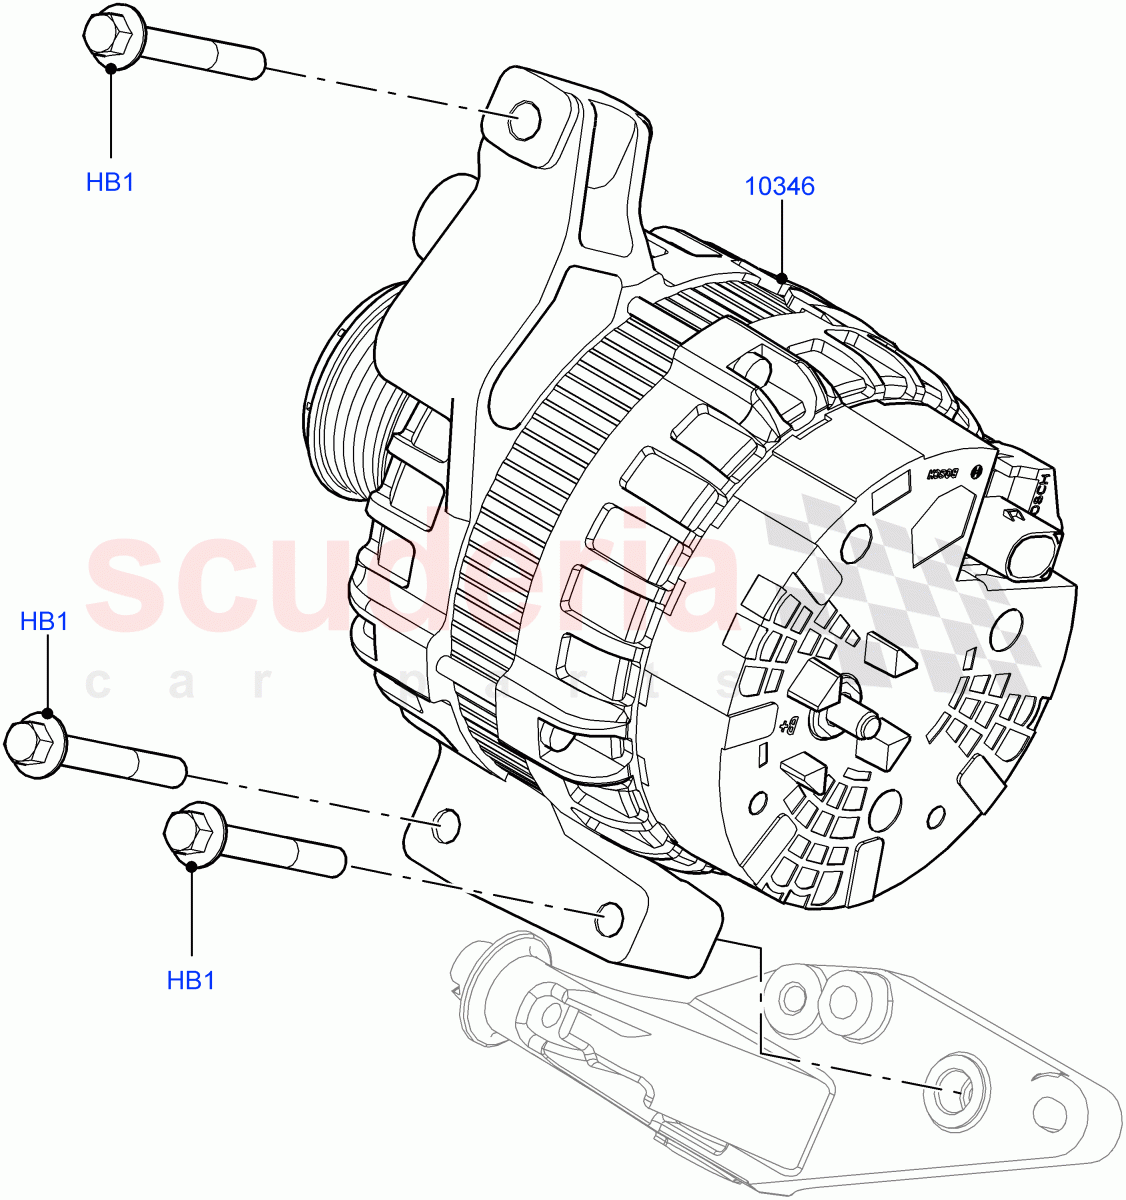 Alternator And Mountings(2.0L 16V TIVCT T/C Gen2 Petrol,Halewood (UK),2.0L 16V TIVCT T/C 240PS Petrol) of Land Rover Land Rover Range Rover Evoque (2012-2018) [2.0 Turbo Petrol GTDI]